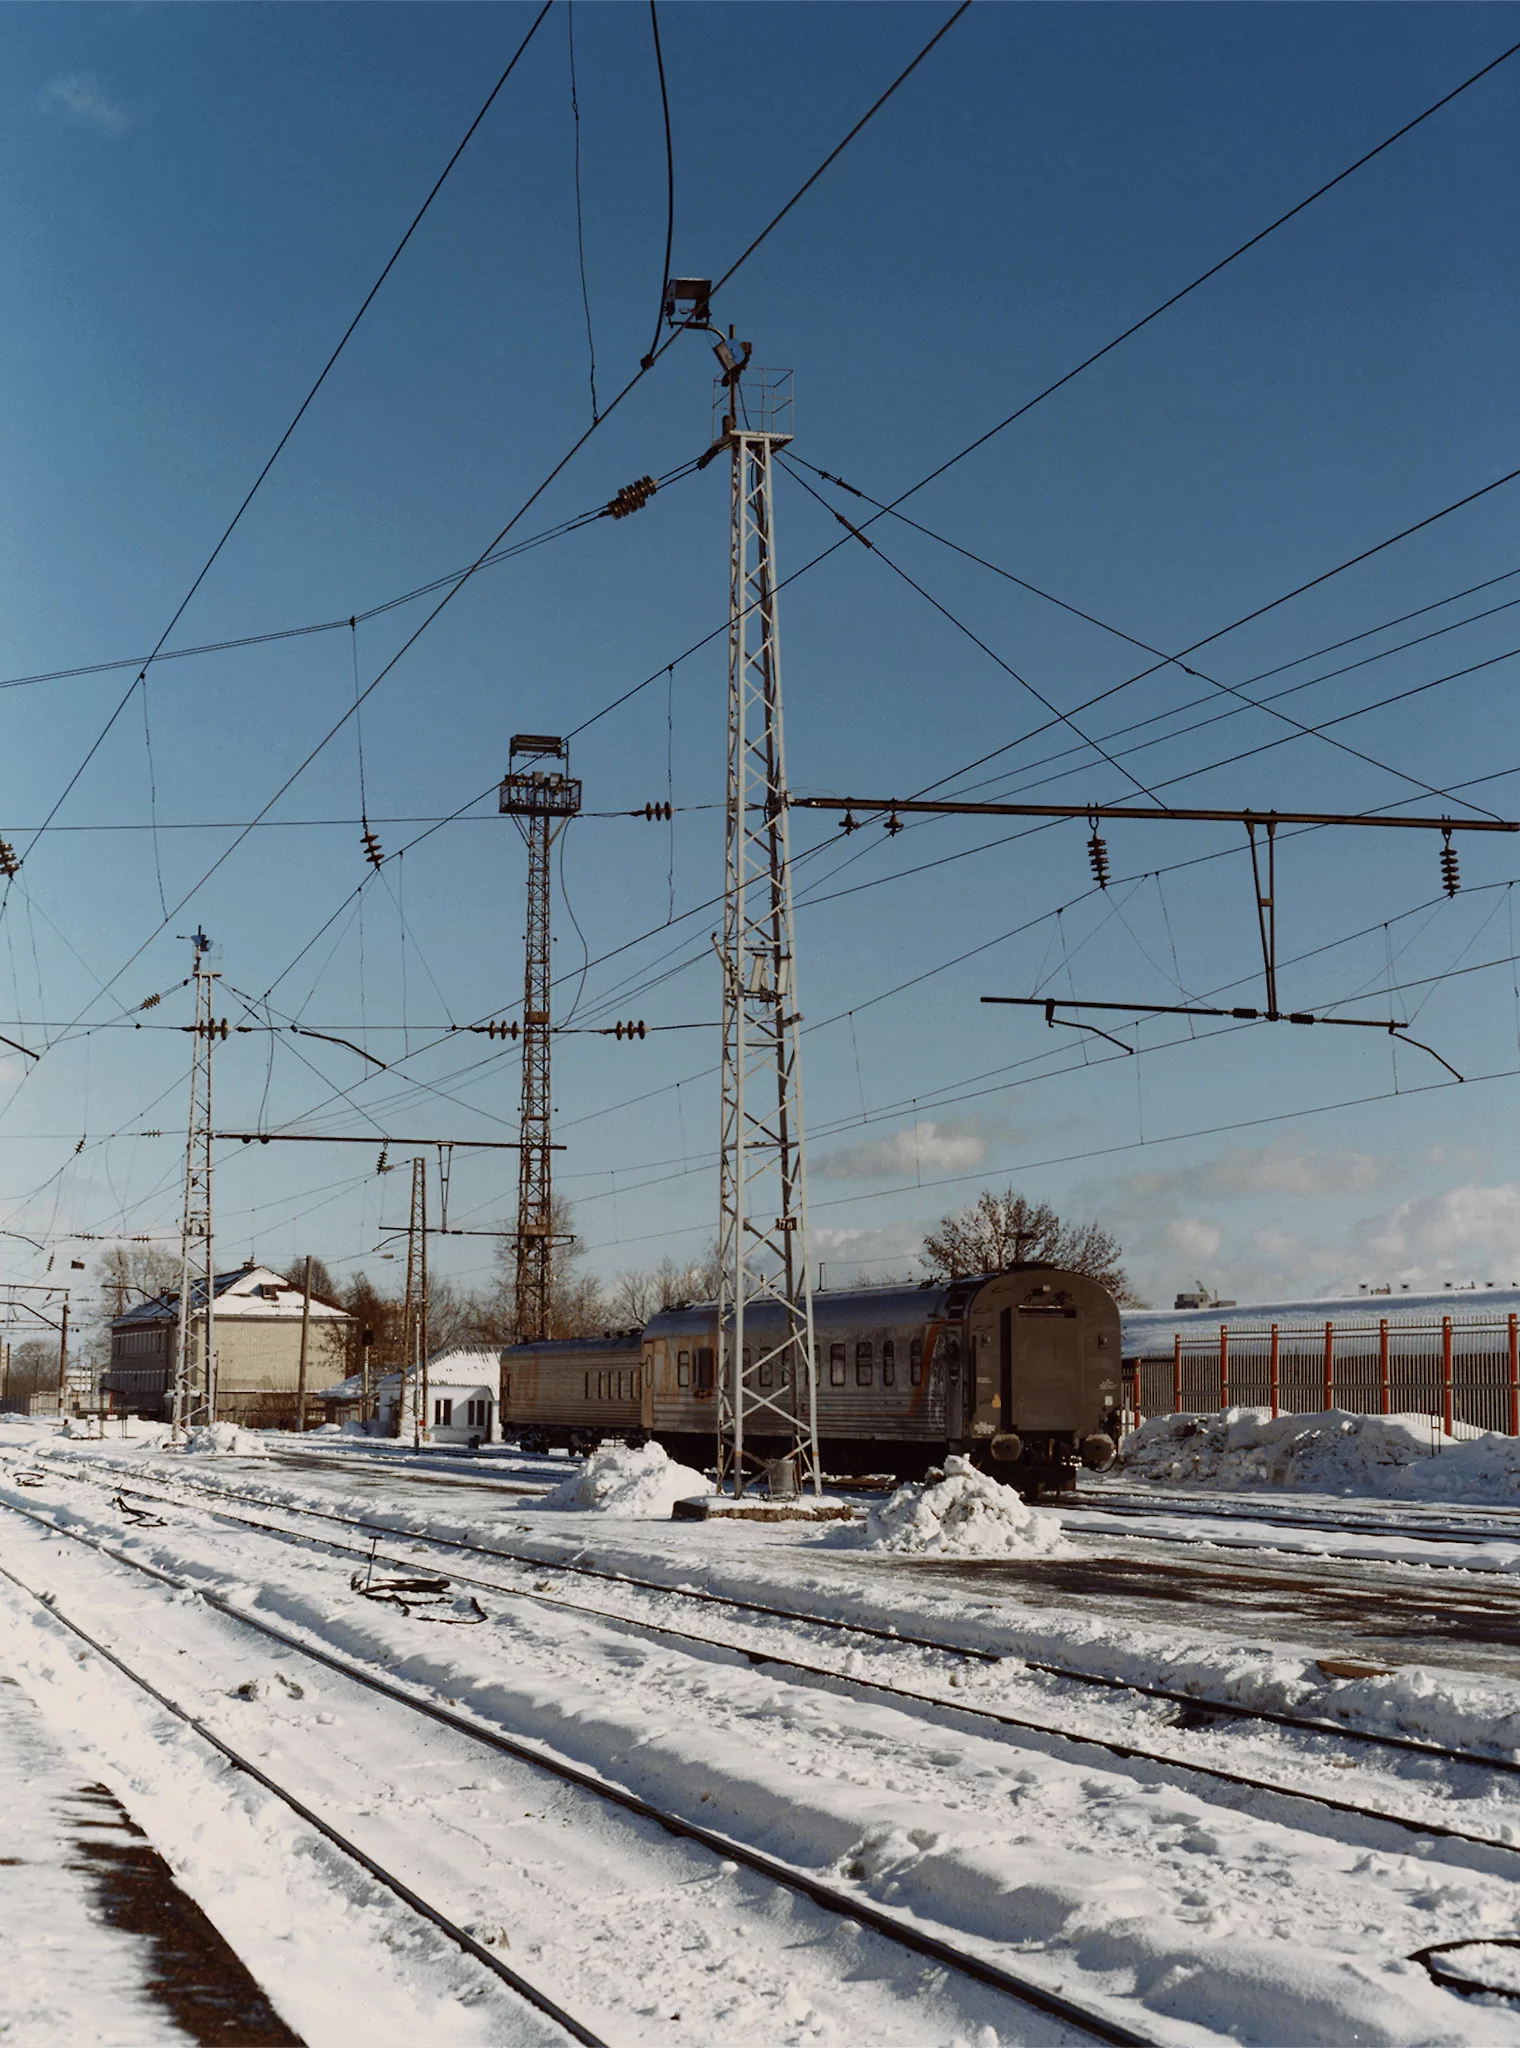 Coco Capitan, Transsiberian | Snow-covered railway tracks and pylons against a blue sky